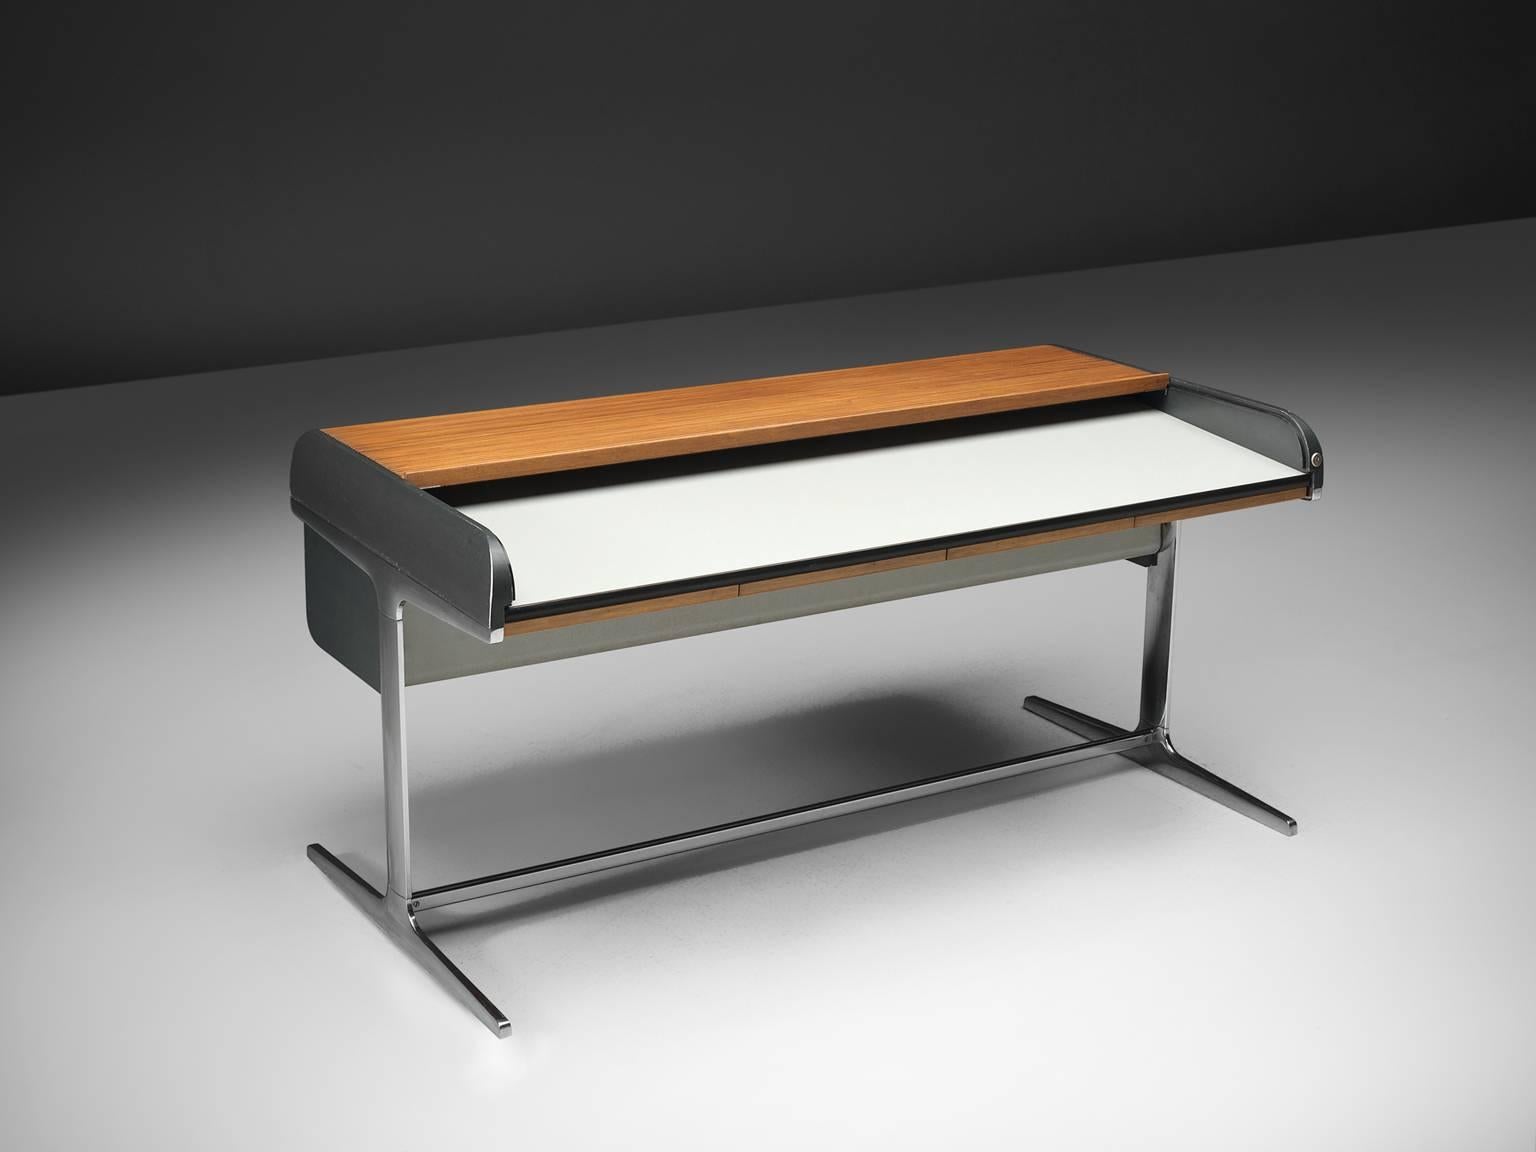 George Nelson for Herman Miller, roll top desk no 64916, polished aluminum, plastic laminate, wood, United States, design 1953, production 1970s.

This roll top desk is designed as part of the Action Office 1 (AO1) furniture line by George Nelson.